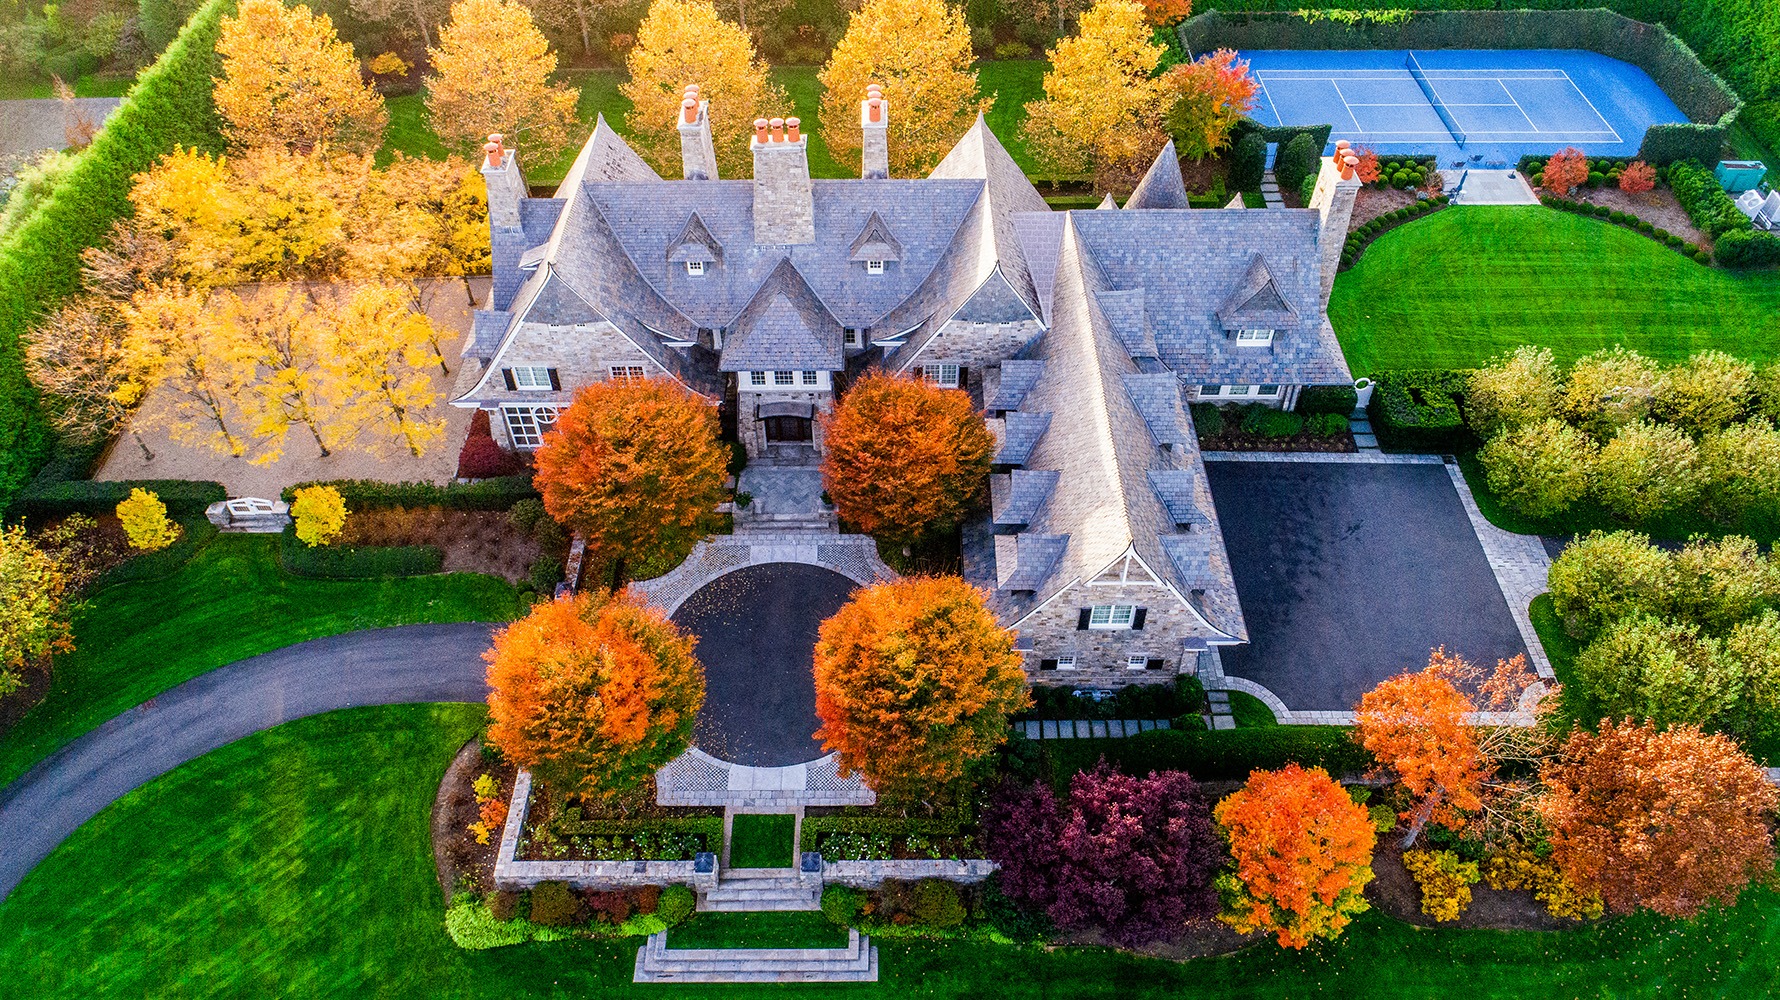 Aerial view of a large, elegant house with a slate roof, surrounded by colorful autumn trees, a manicured lawn, tennis court, and circular driveway.